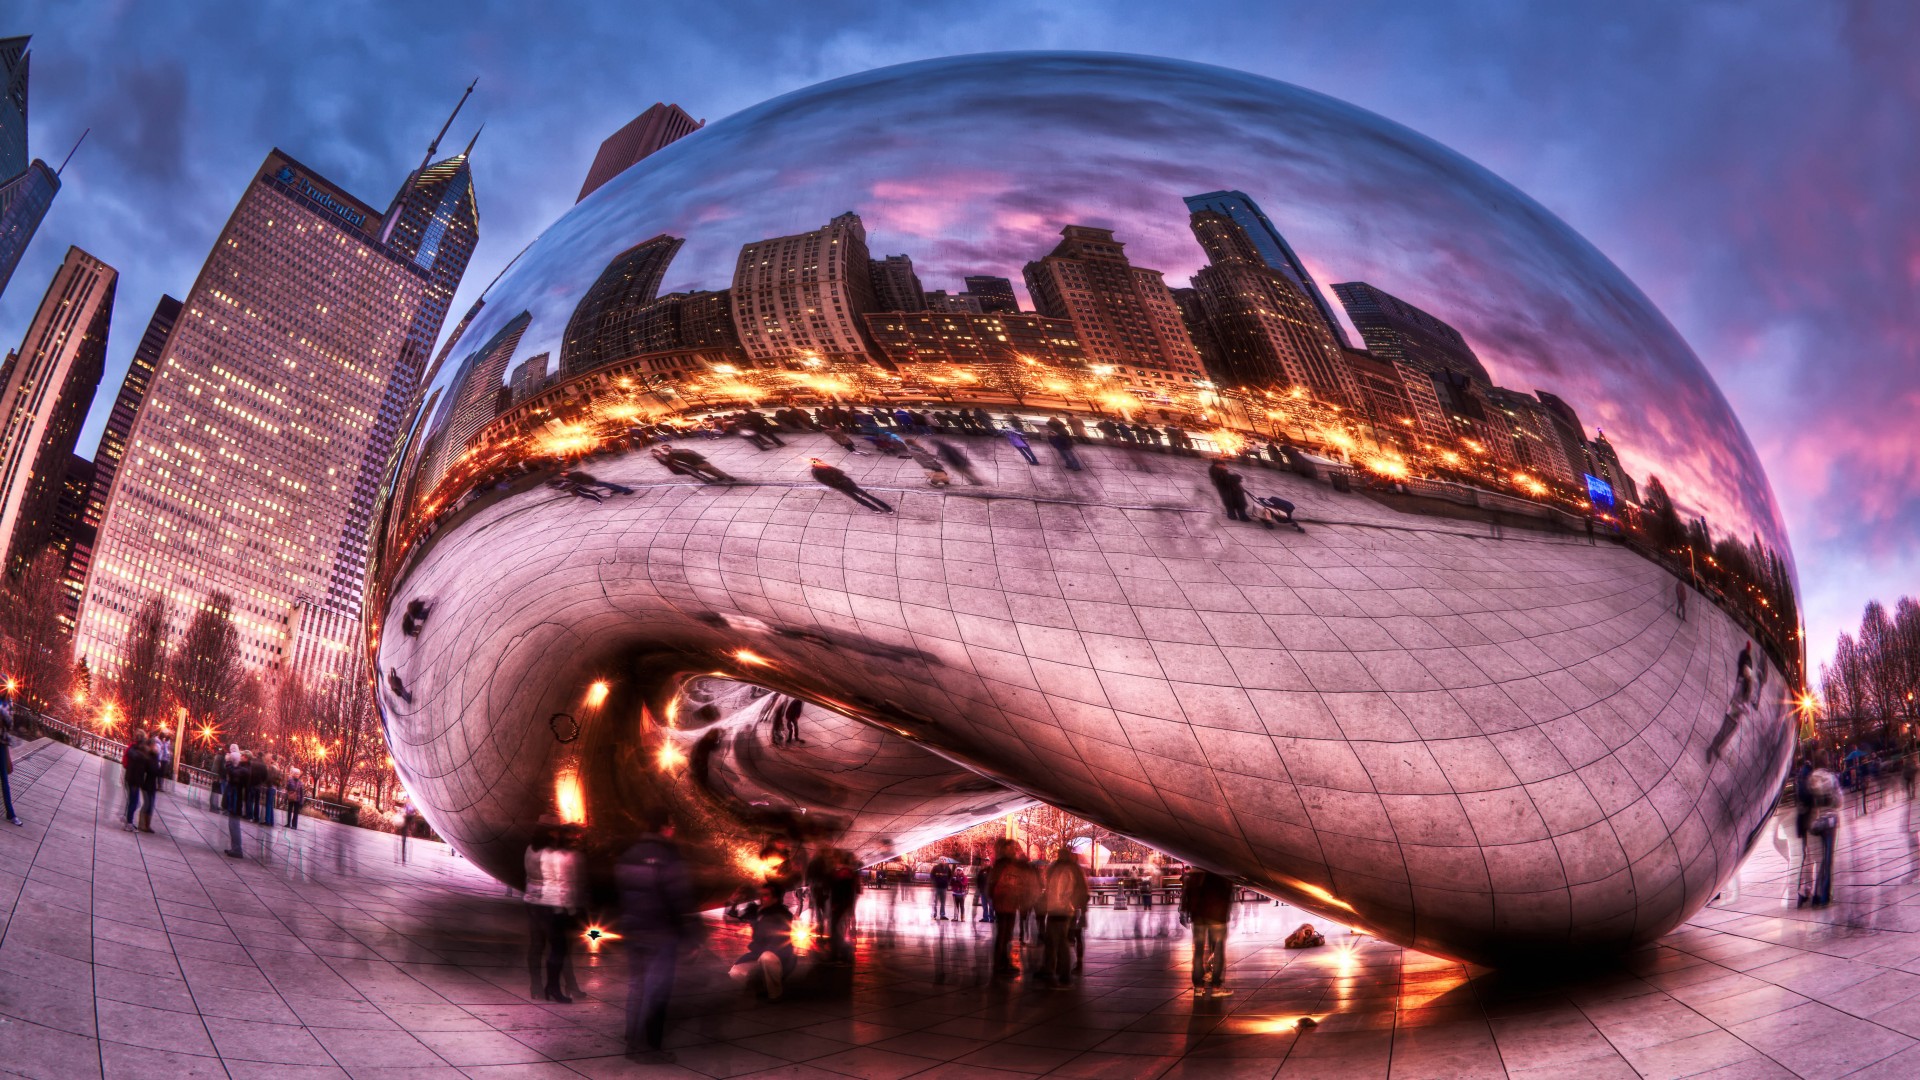 cities, Chicago, Millennium, Park, People, Clouds, Hdr, Exposure, Fish eye, Reflection, Buildings, People Wallpaper